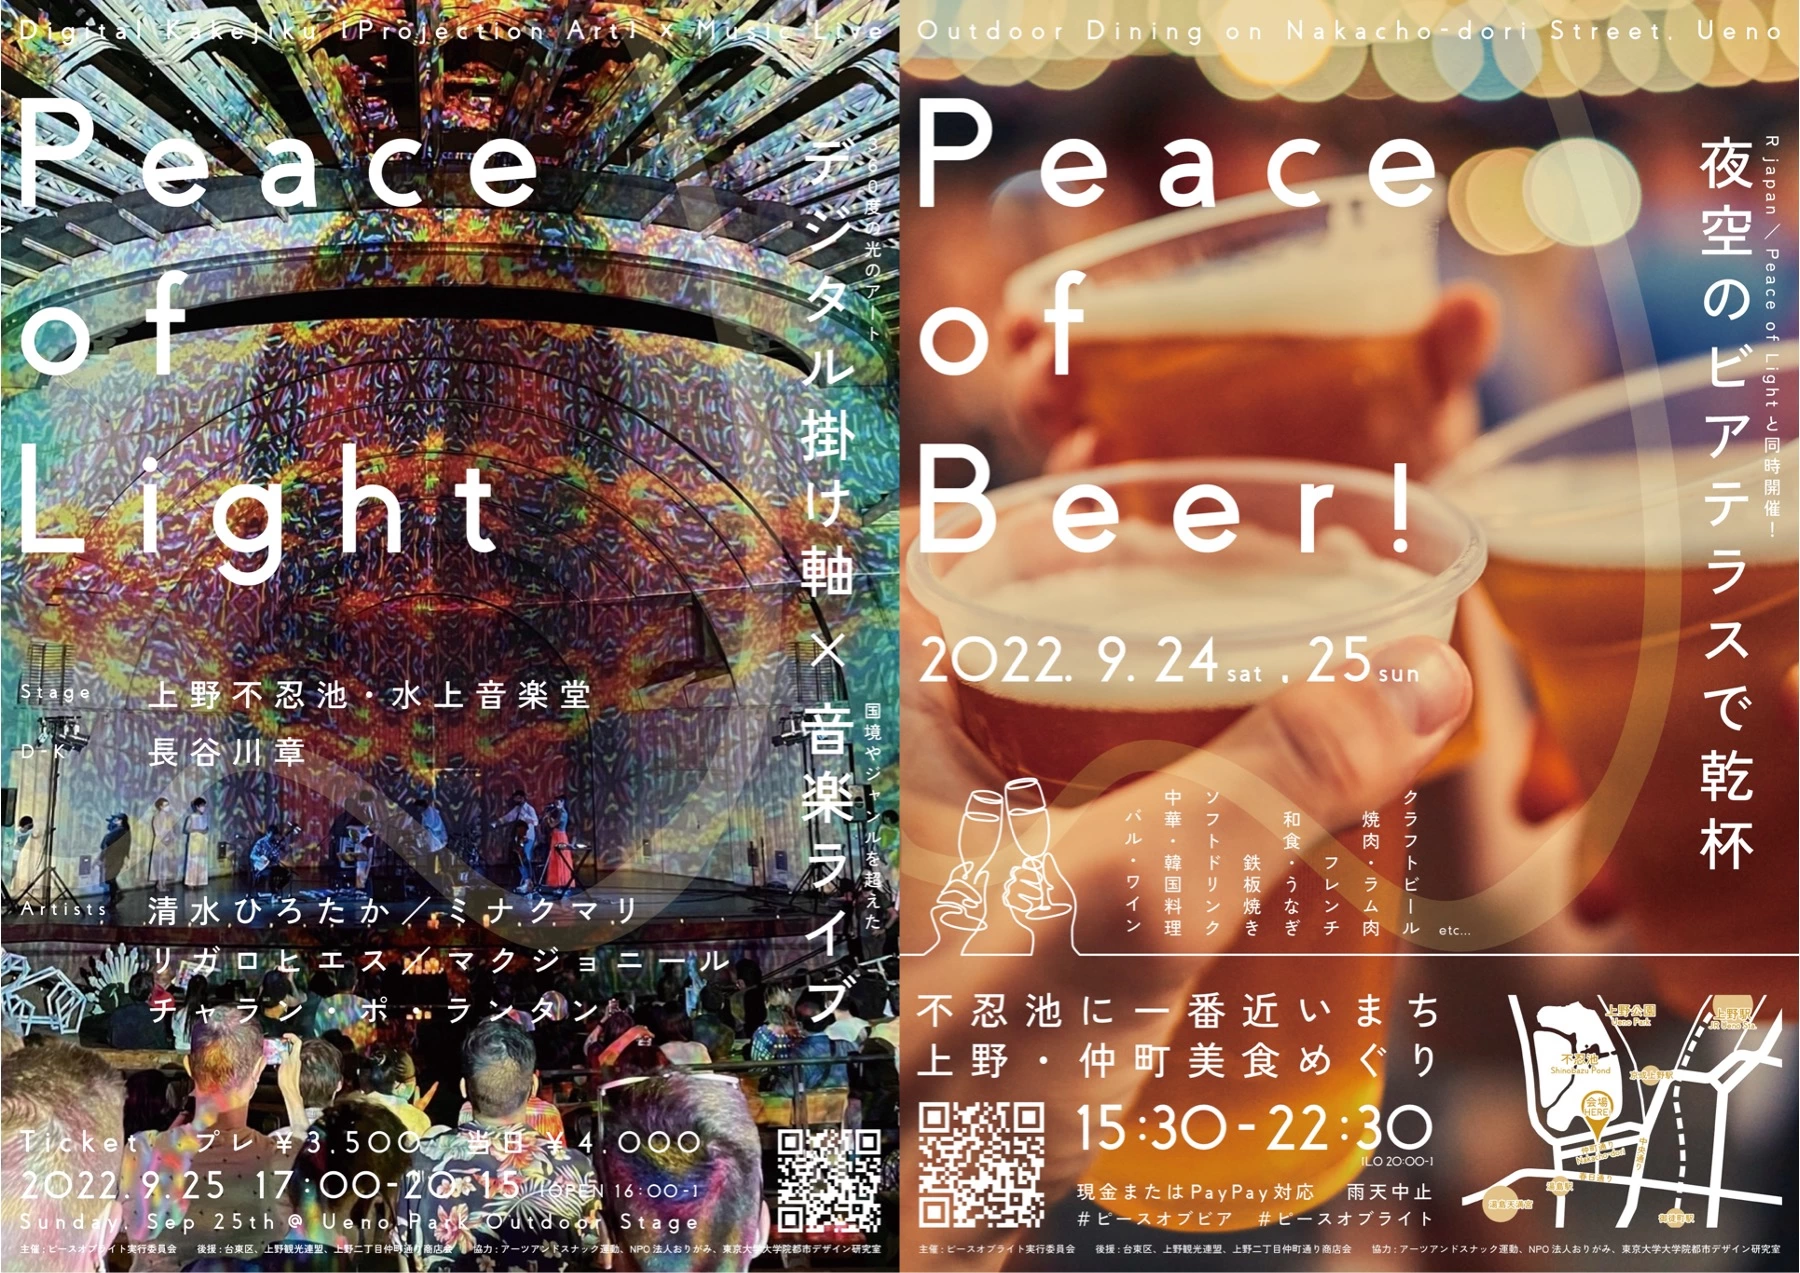 Peace of Light / Peace of Beer